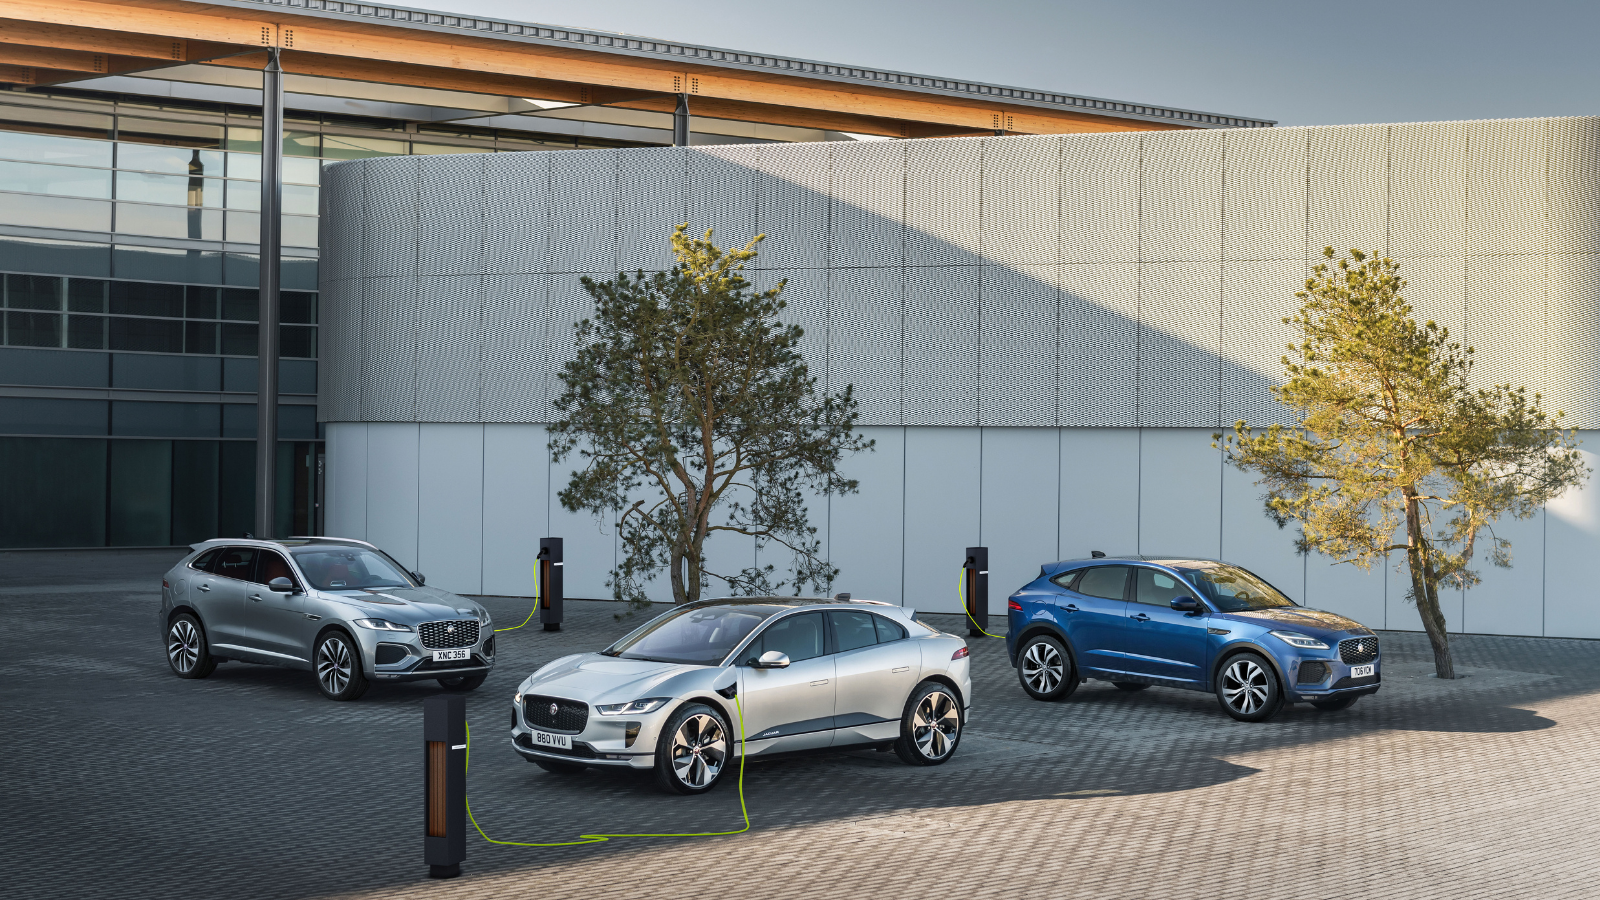 THE BENEFITS OF OWNING A JAGUAR I-PACE